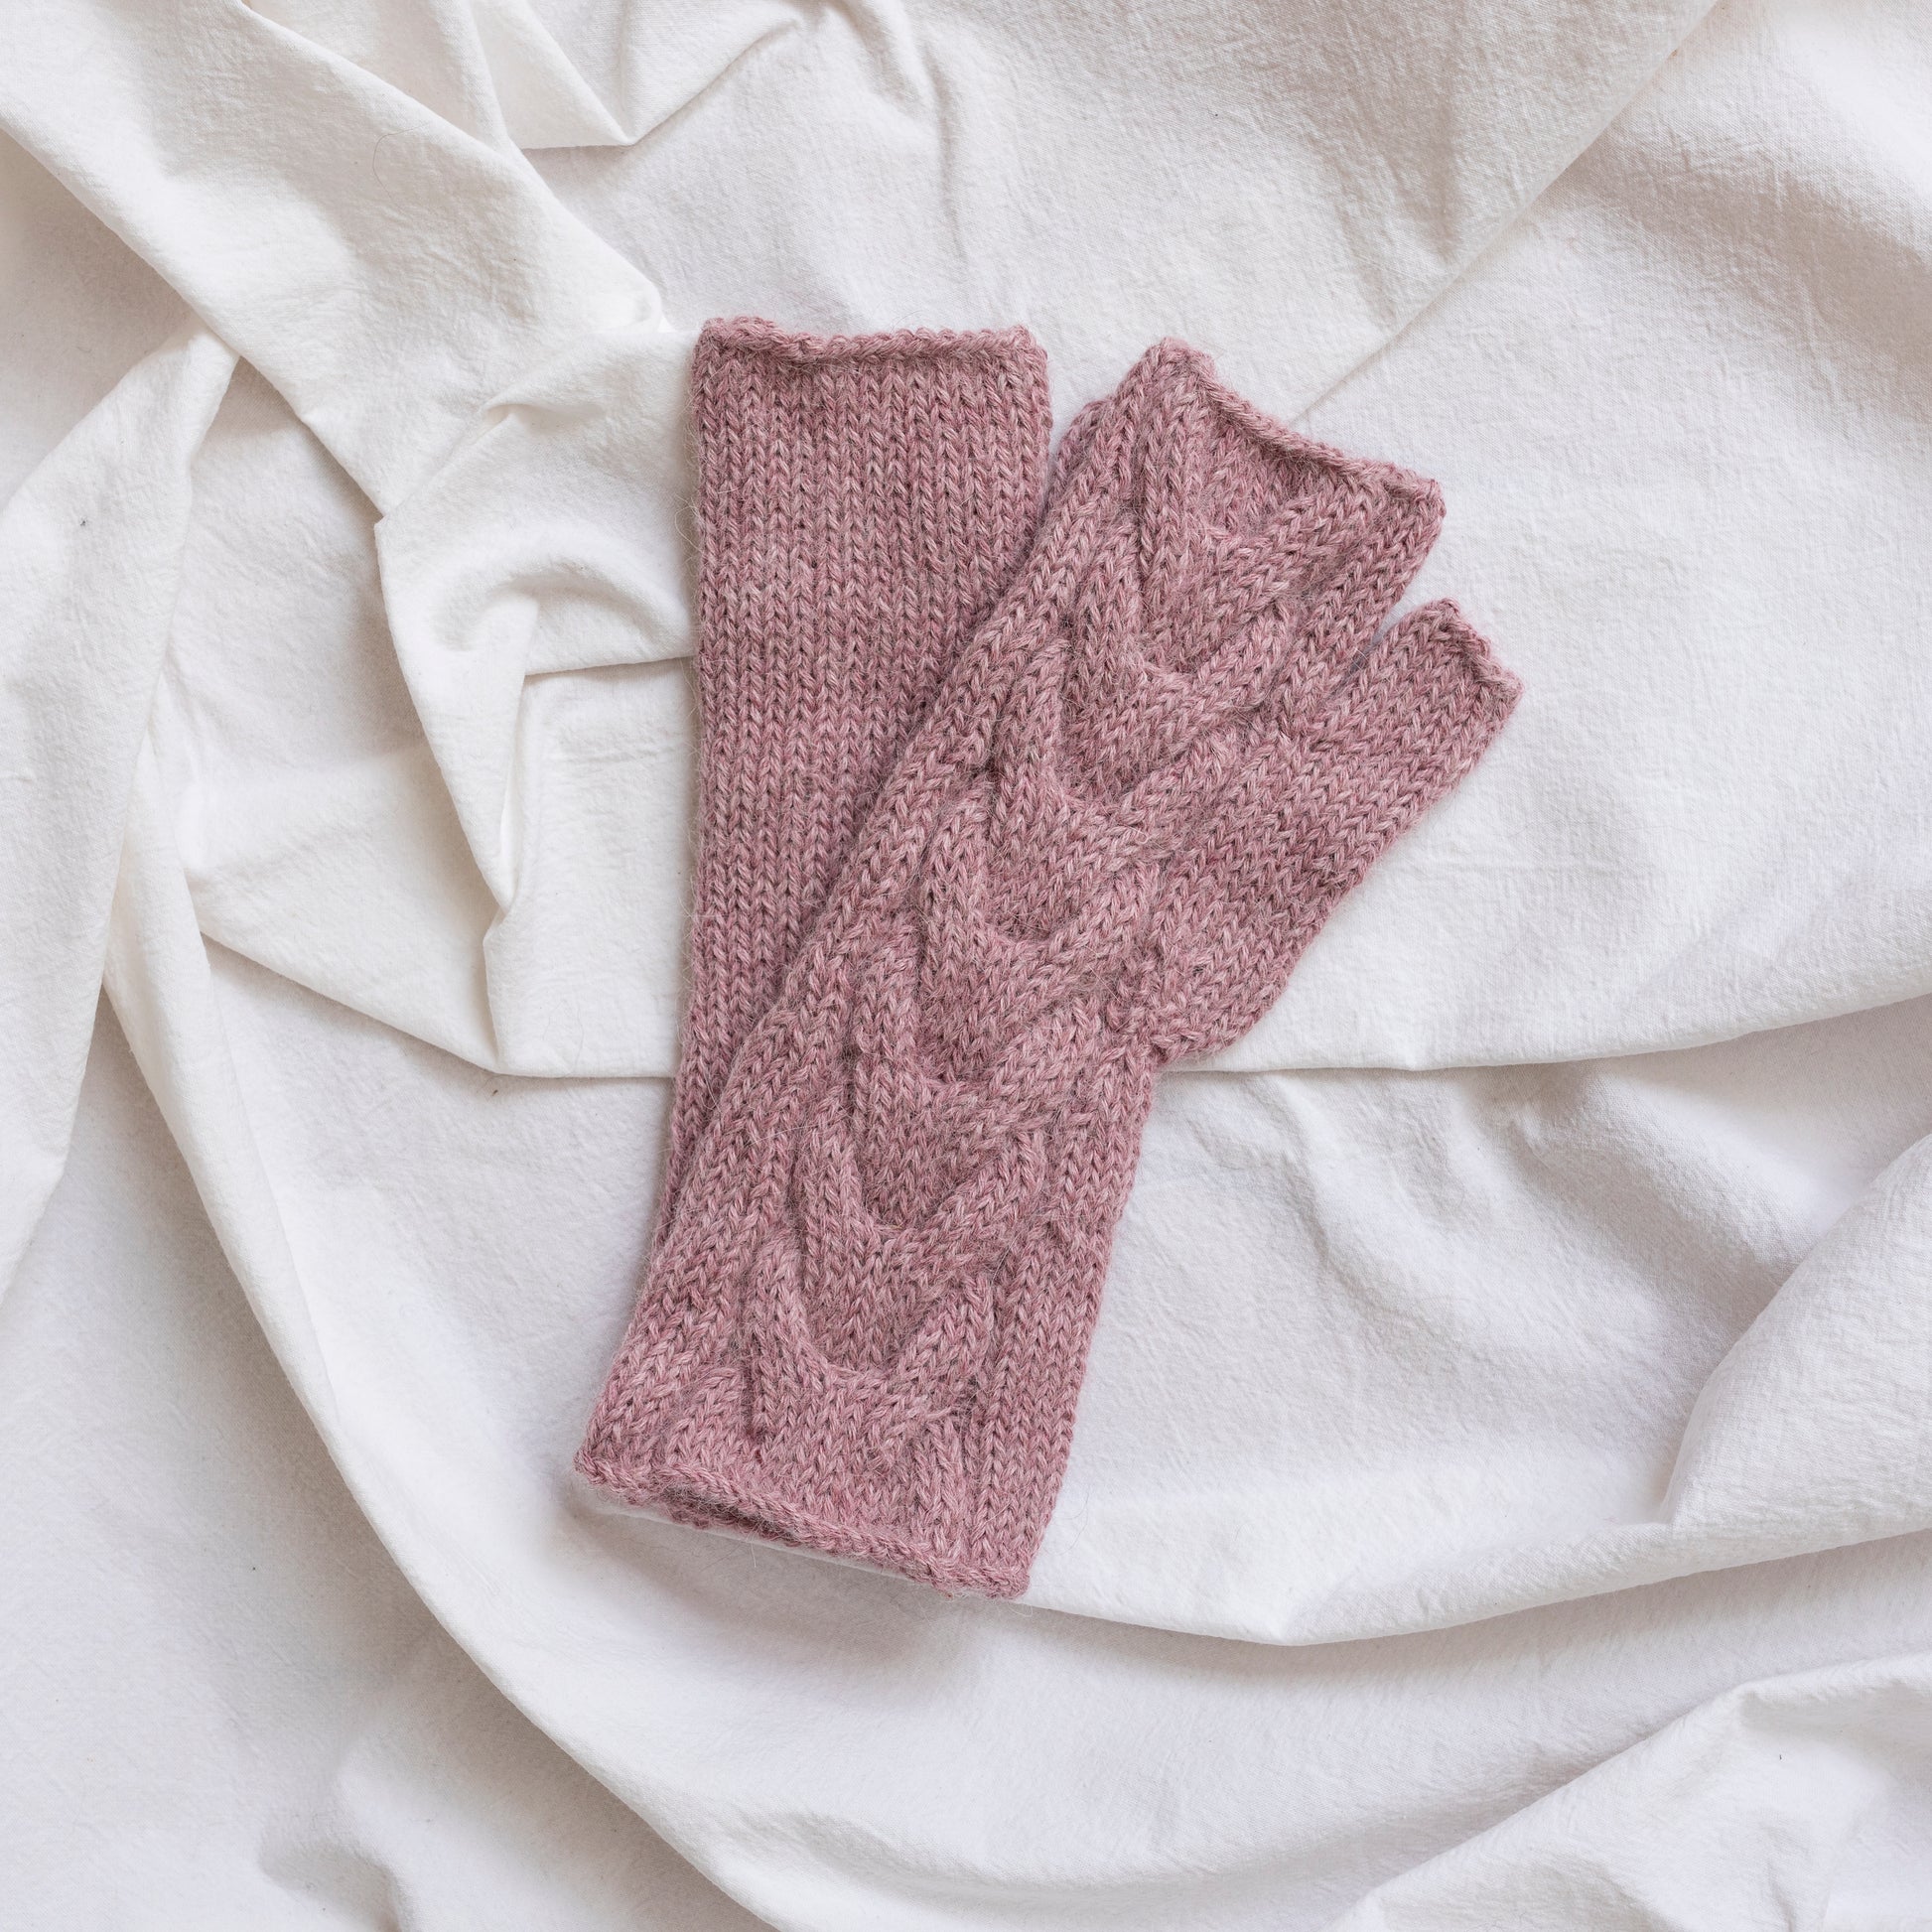 Rose pink coloured, super-soft and silky hand-knitted alpaca wool mittens.